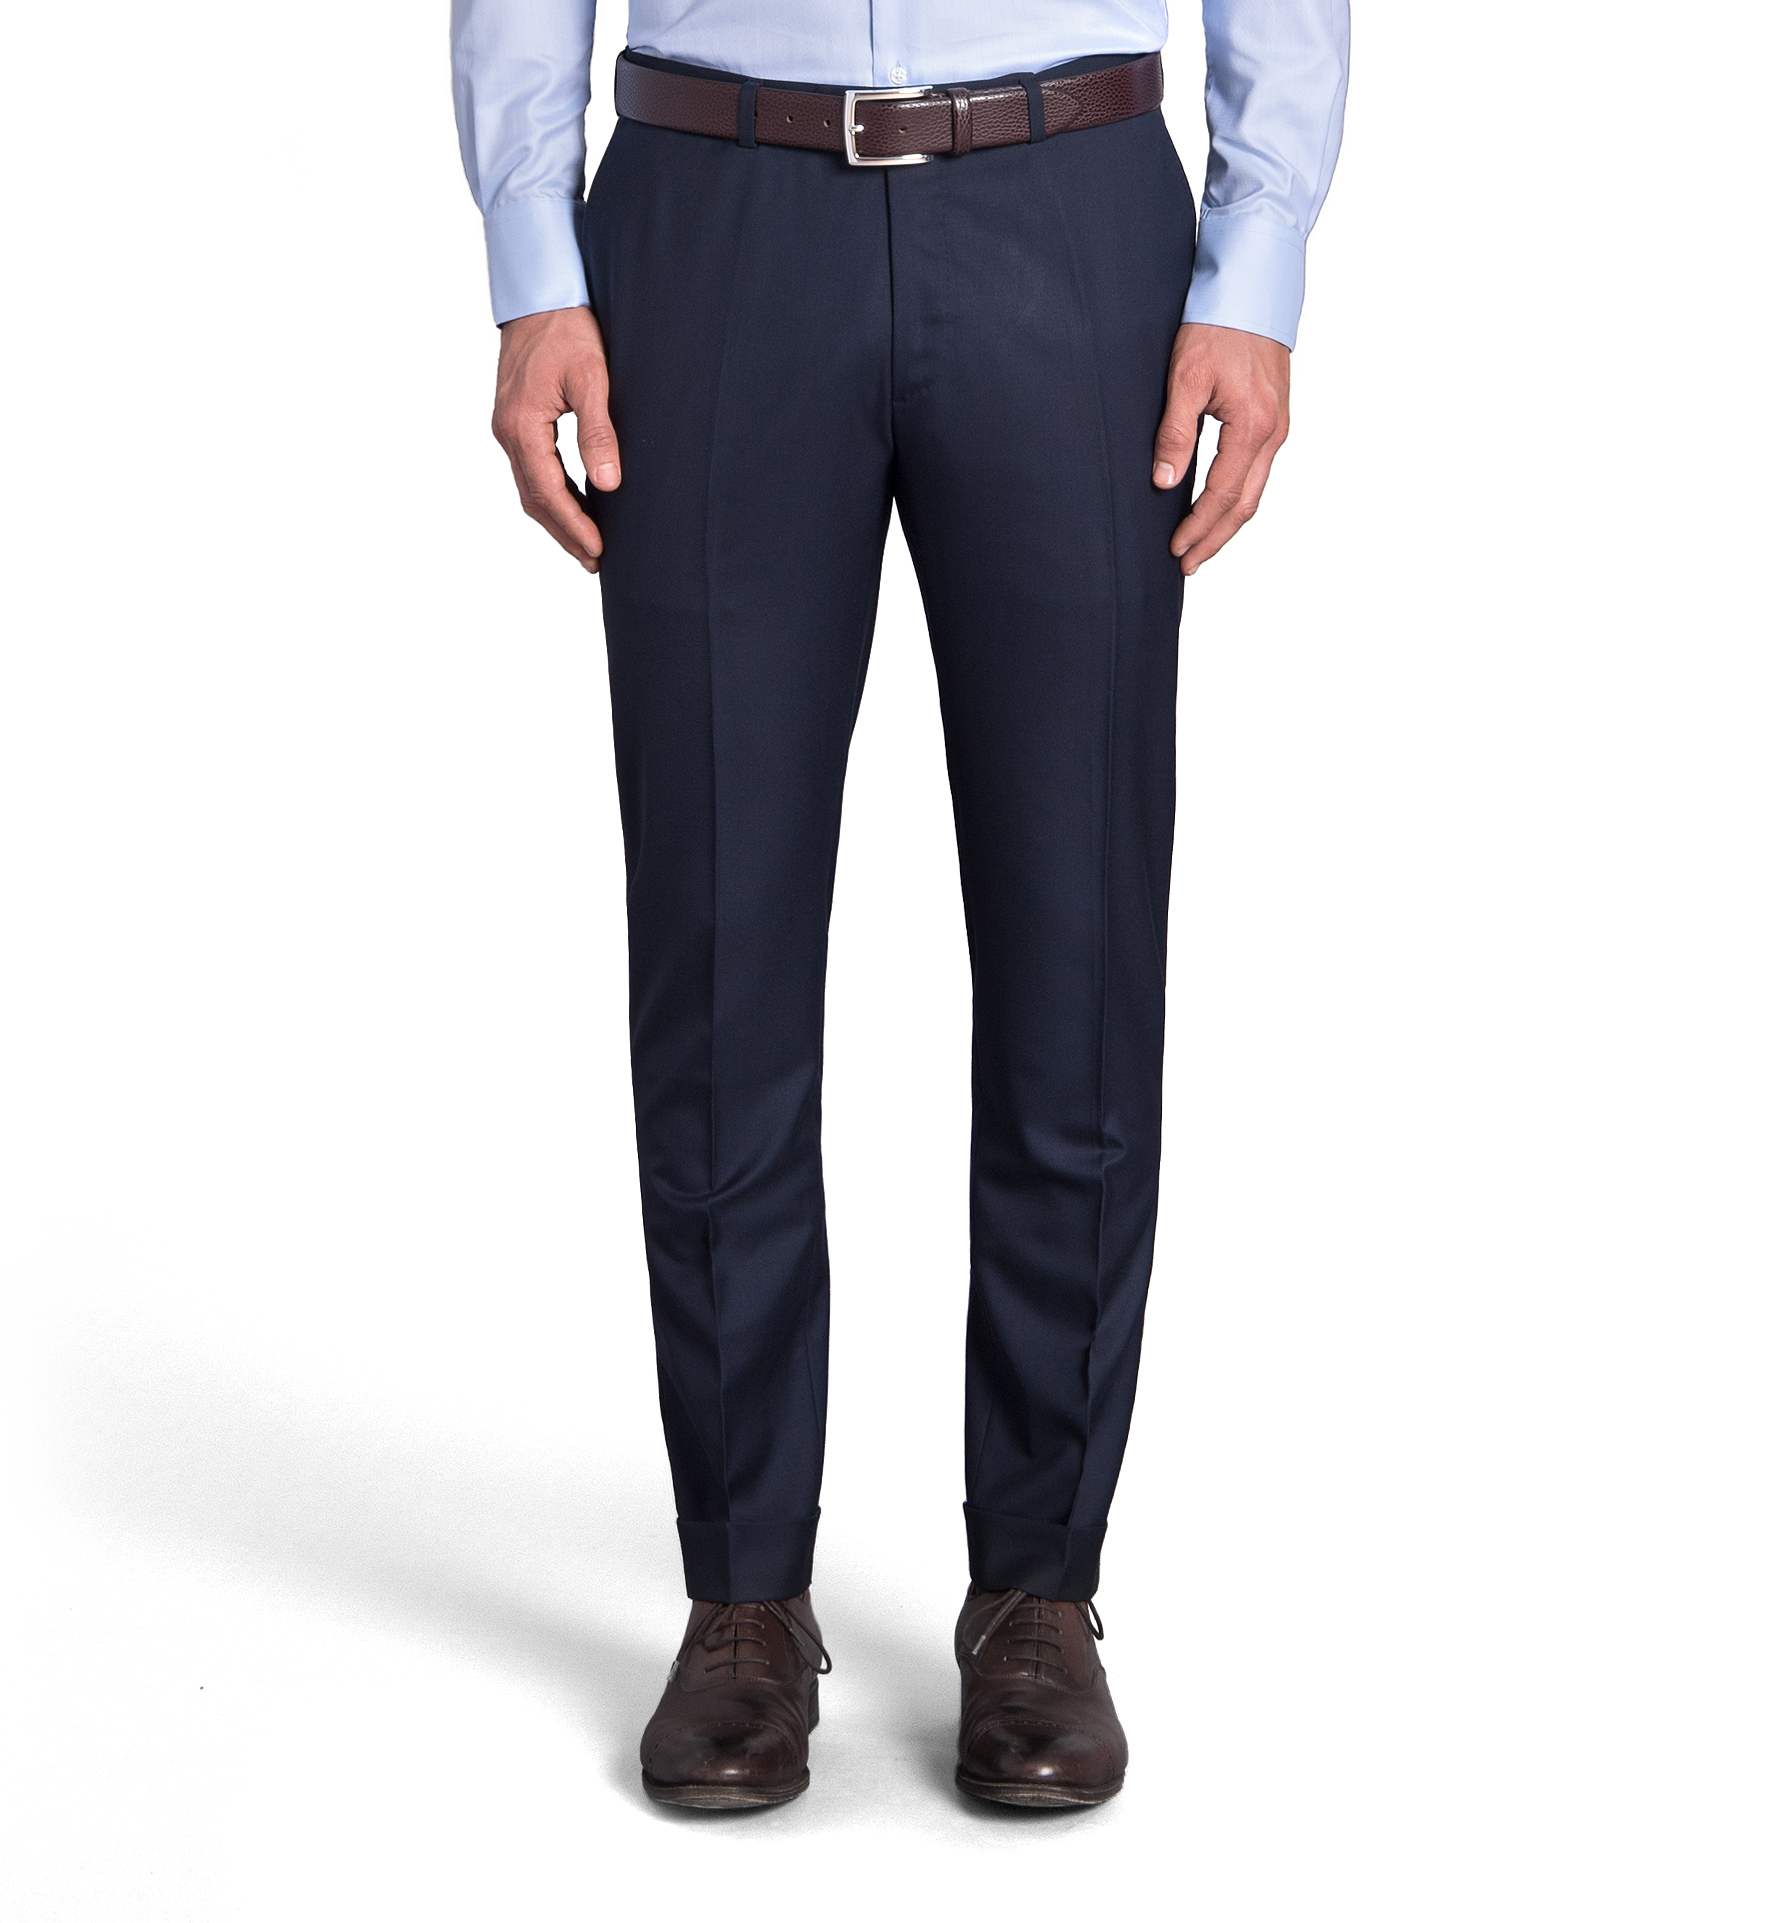 Mercer Navy S150s Wool Cuffed Dress Pant - Custom Fit Tailored Clothing